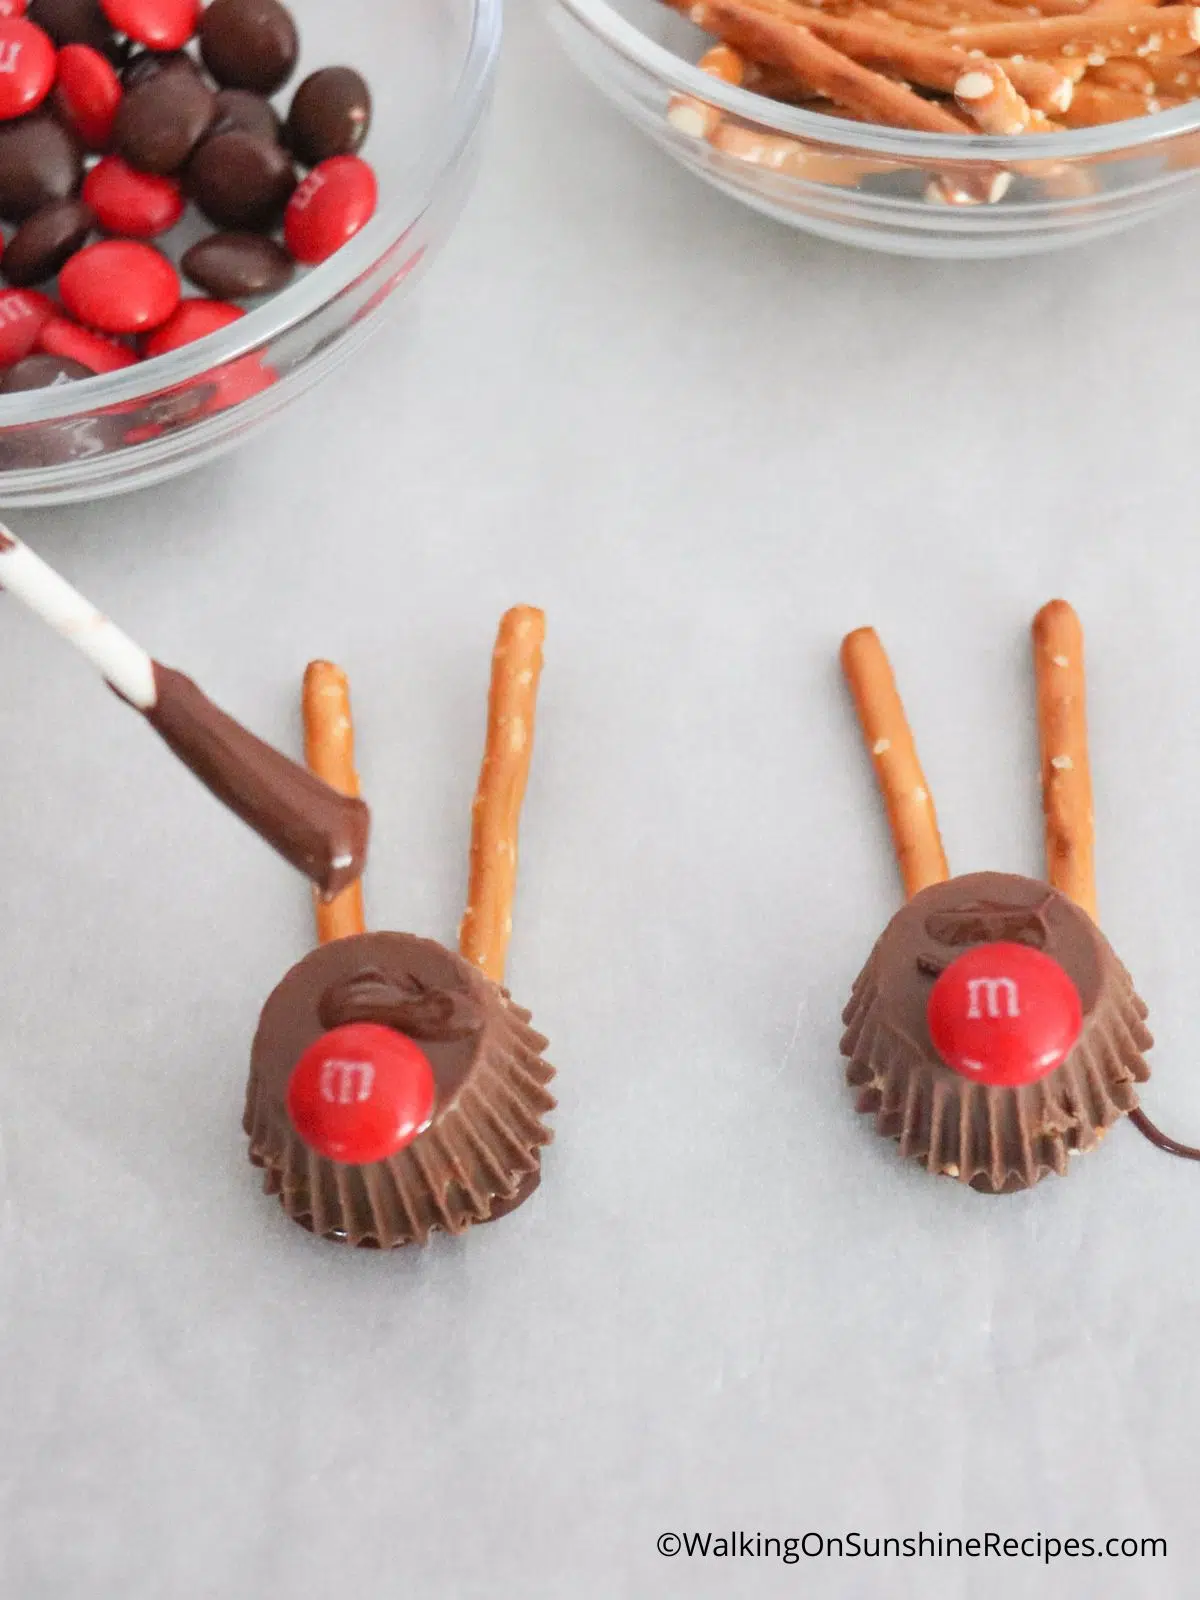 Add red M&Ms for reindeer nose to peanut butter cups.